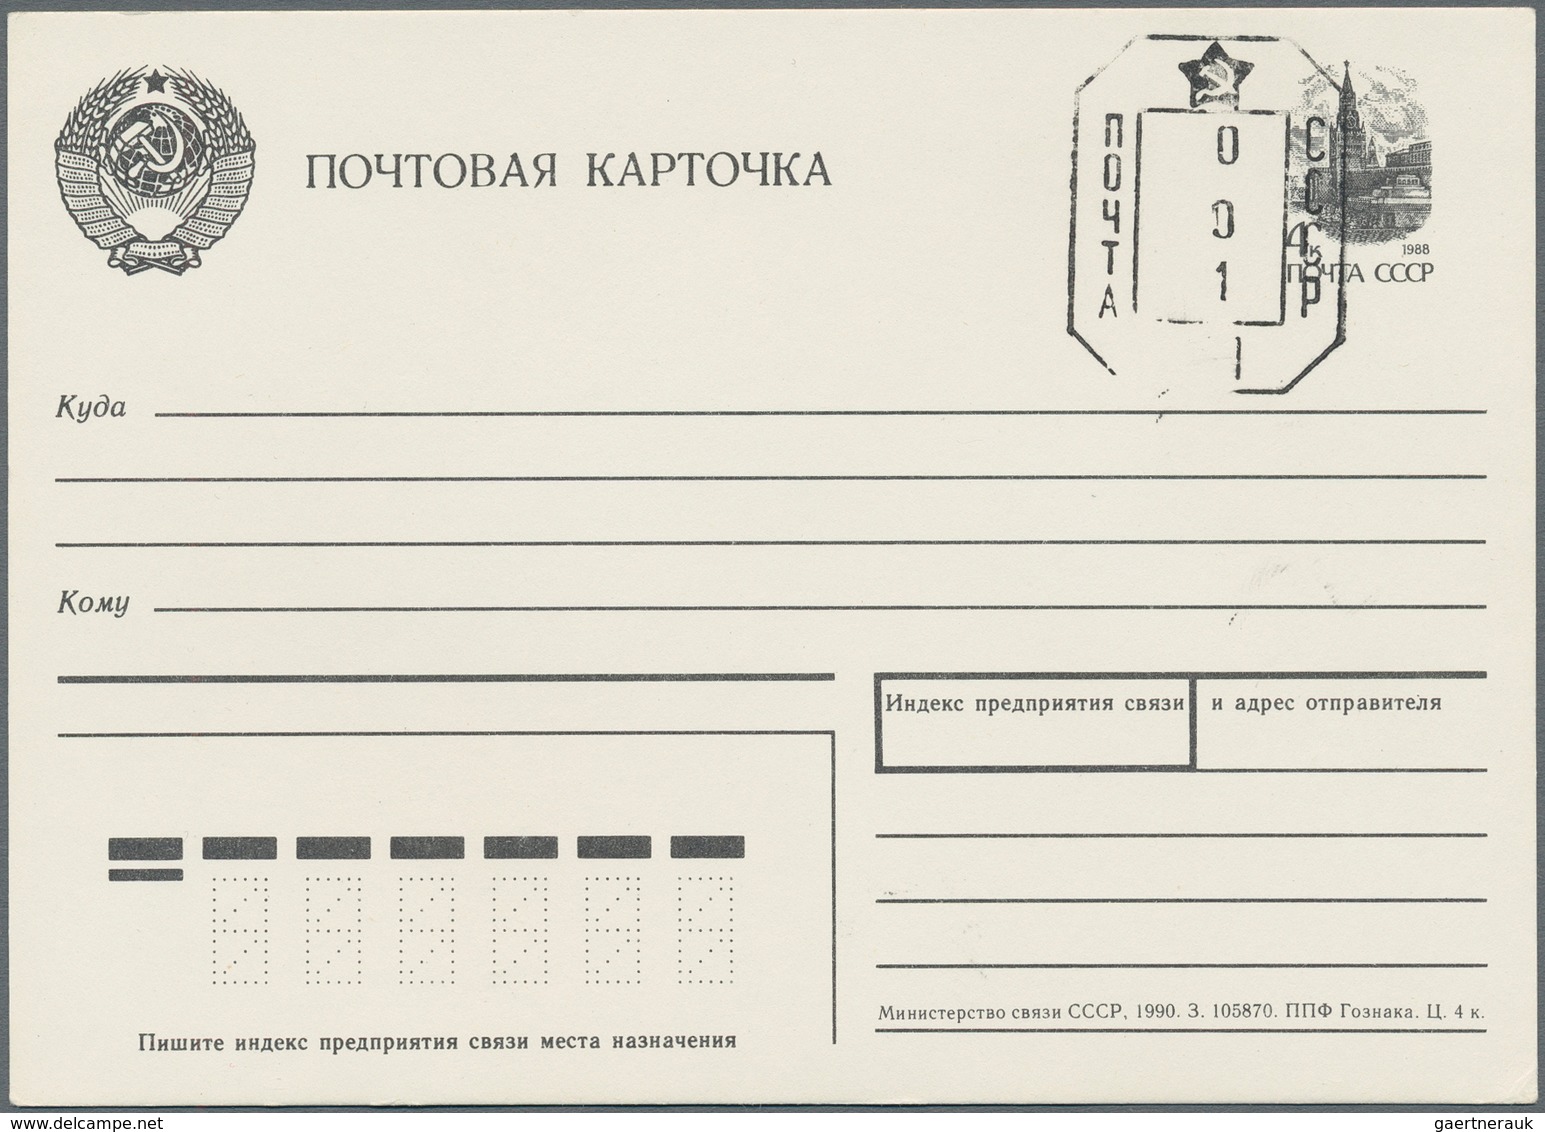 Russland - Ganzsachen: 1992/98 ca. 1.500 unused postal stationery postcards and envelopes, also with